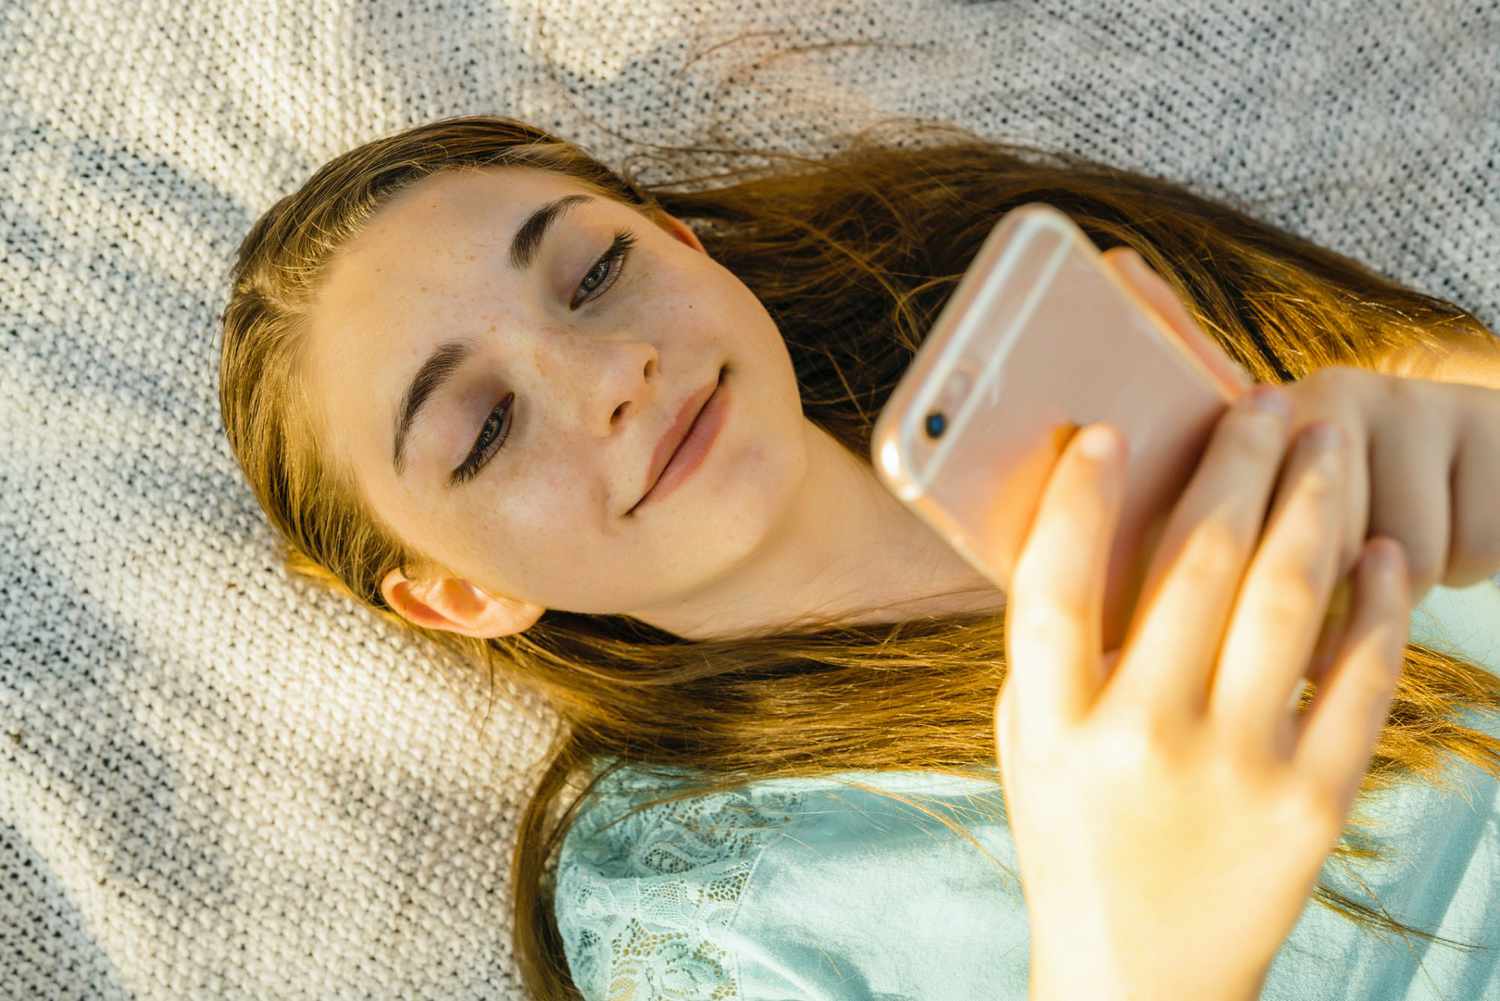 An image of a girl on her phone.